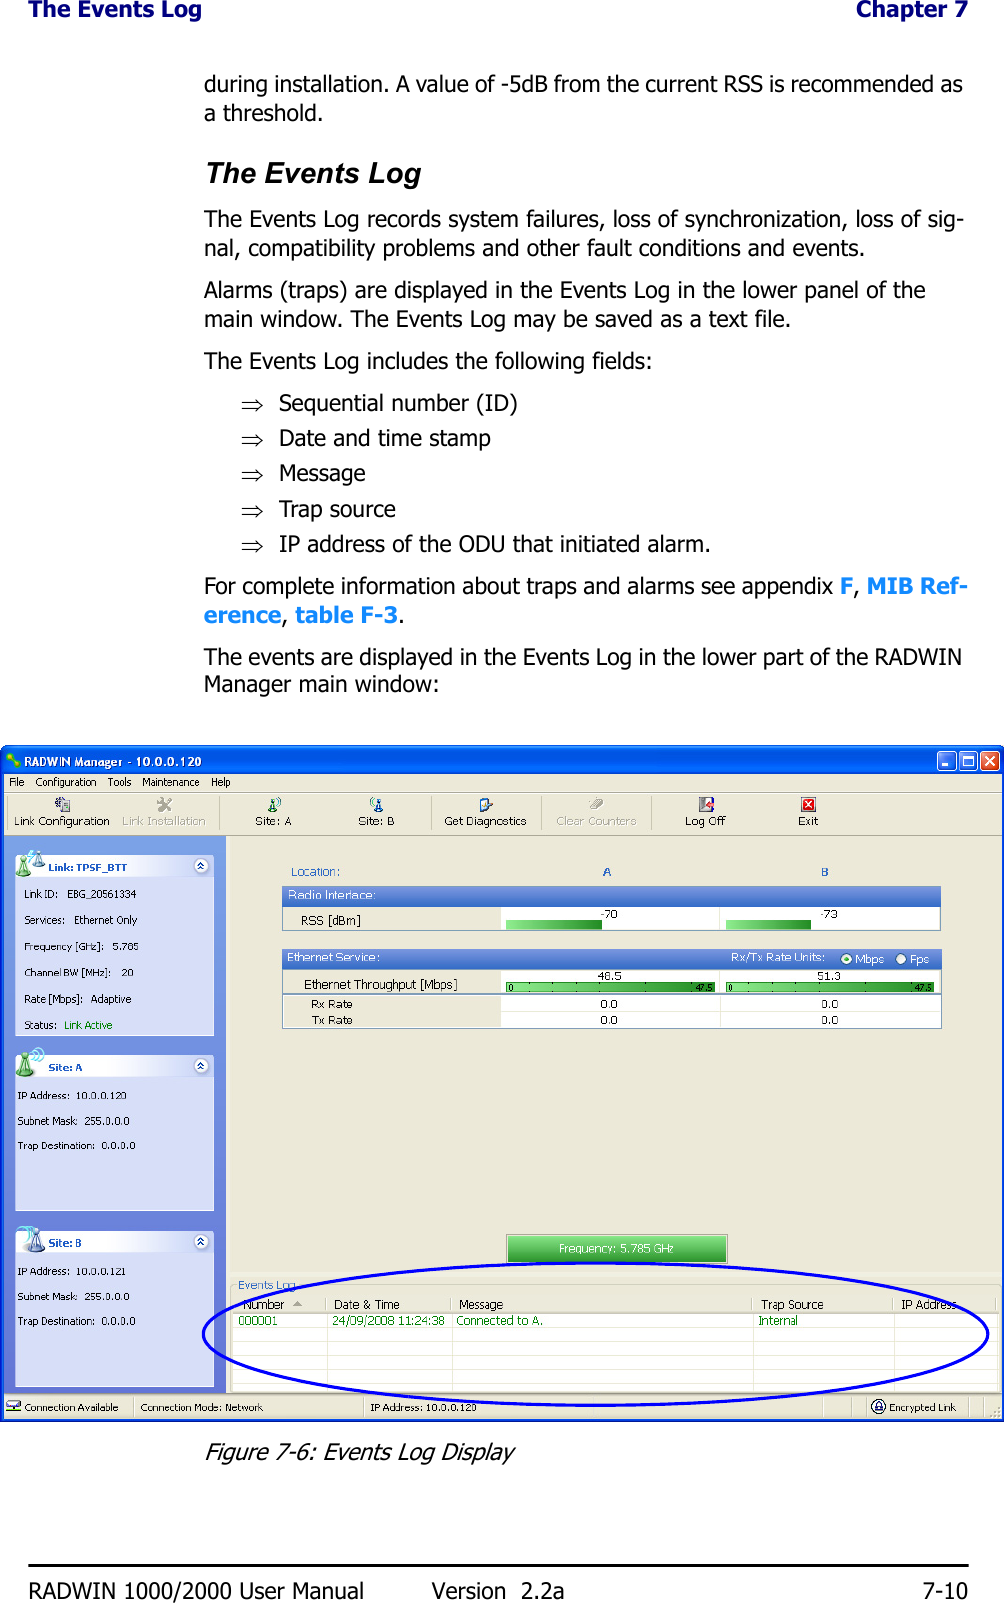 The Events Log  Chapter 7RADWIN 1000/2000 User Manual Version  2.2a 7-10during installation. A value of -5dB from the current RSS is recommended as a threshold.The Events LogThe Events Log records system failures, loss of synchronization, loss of sig-nal, compatibility problems and other fault conditions and events.Alarms (traps) are displayed in the Events Log in the lower panel of the main window. The Events Log may be saved as a text file.The Events Log includes the following fields:⇒Sequential number (ID)⇒Date and time stamp⇒Message⇒Trap source⇒IP address of the ODU that initiated alarm.For complete information about traps and alarms see appendix F, MIB Ref-erence, table F-3.The events are displayed in the Events Log in the lower part of the RADWIN Manager main window:Figure 7-6: Events Log Display